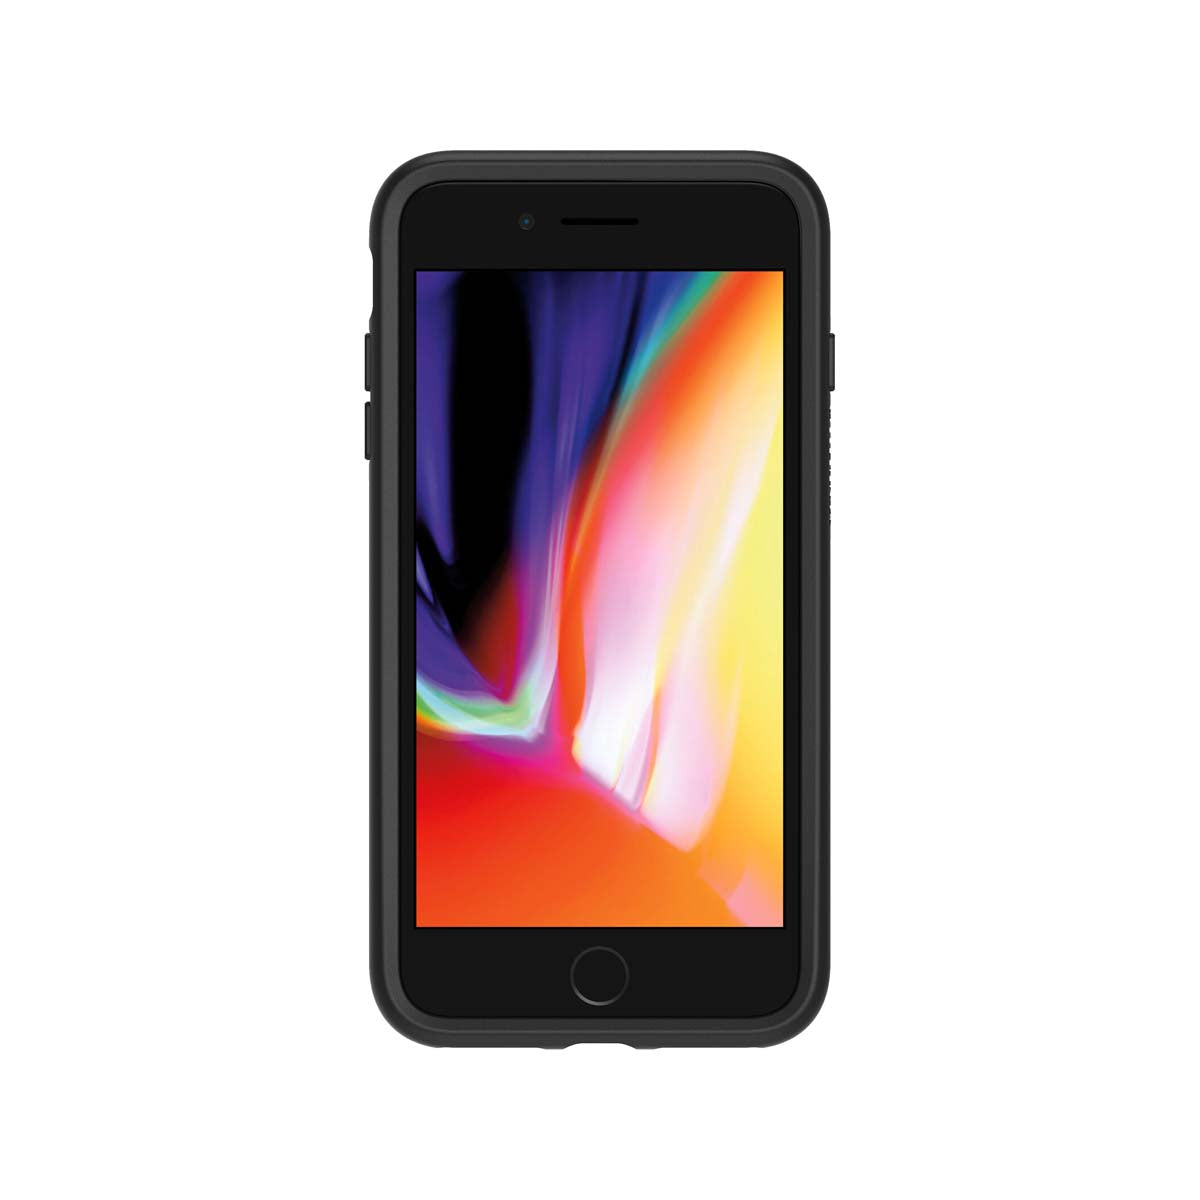 OtterBox Symmetry Phone Case for iPhone 7/8 Plus.